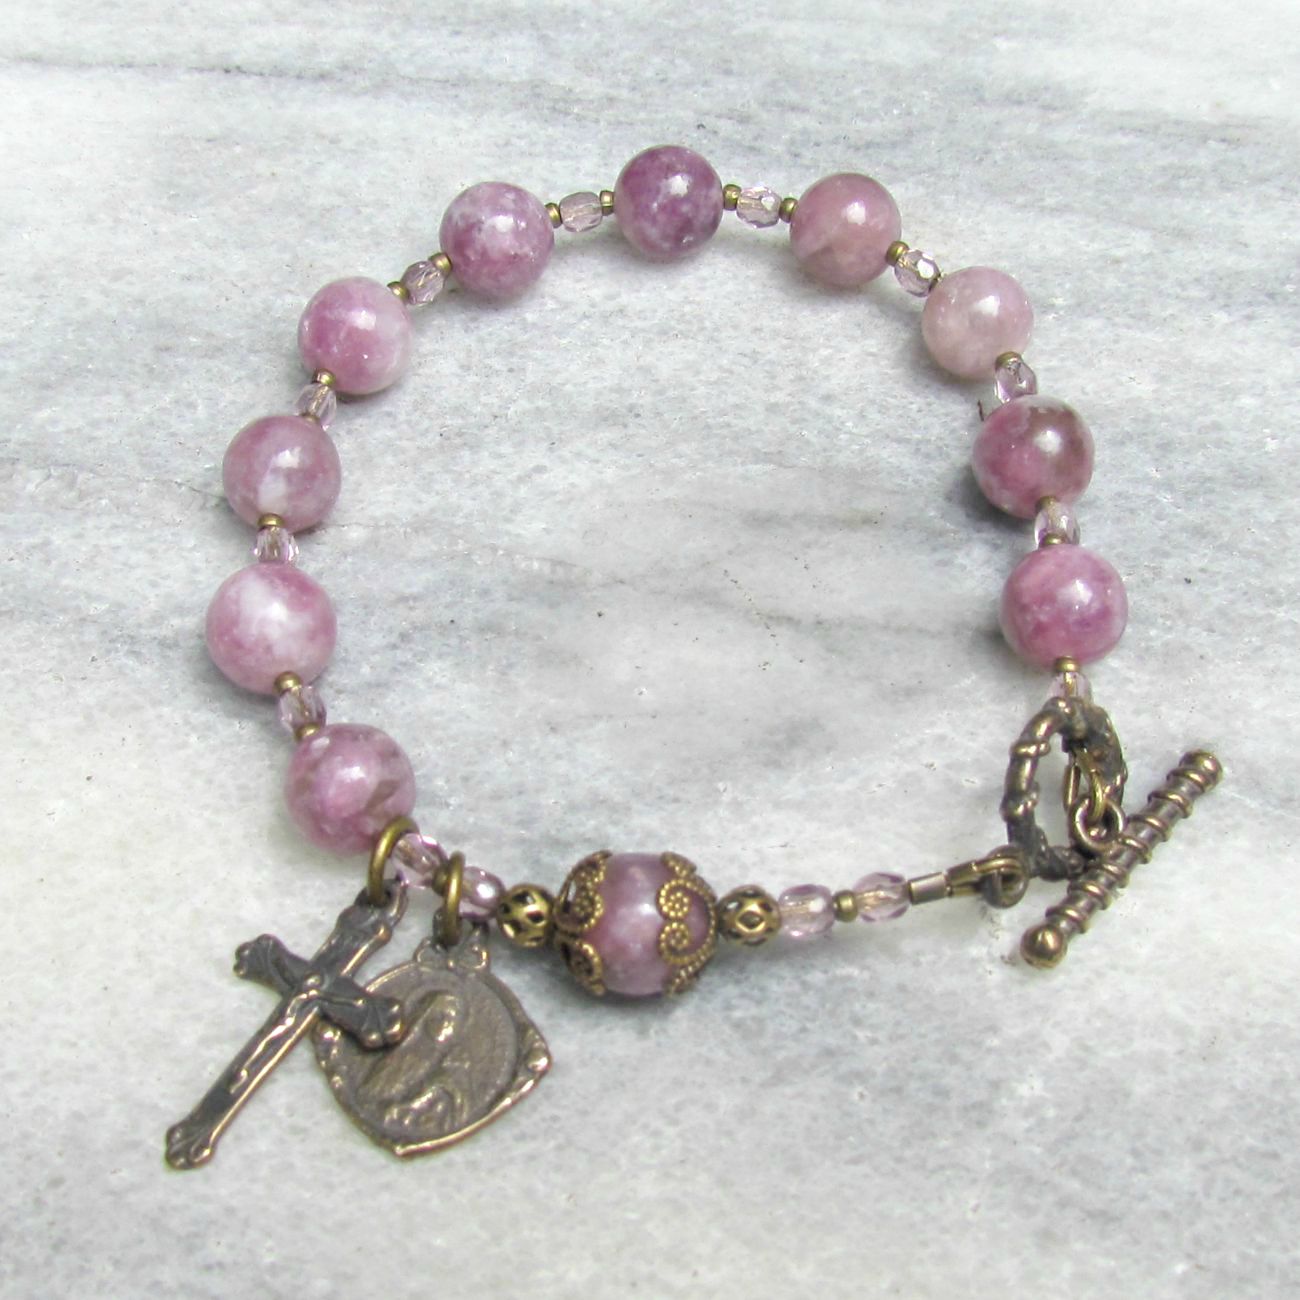 St Therese Bracelet with Pink Lepidolite